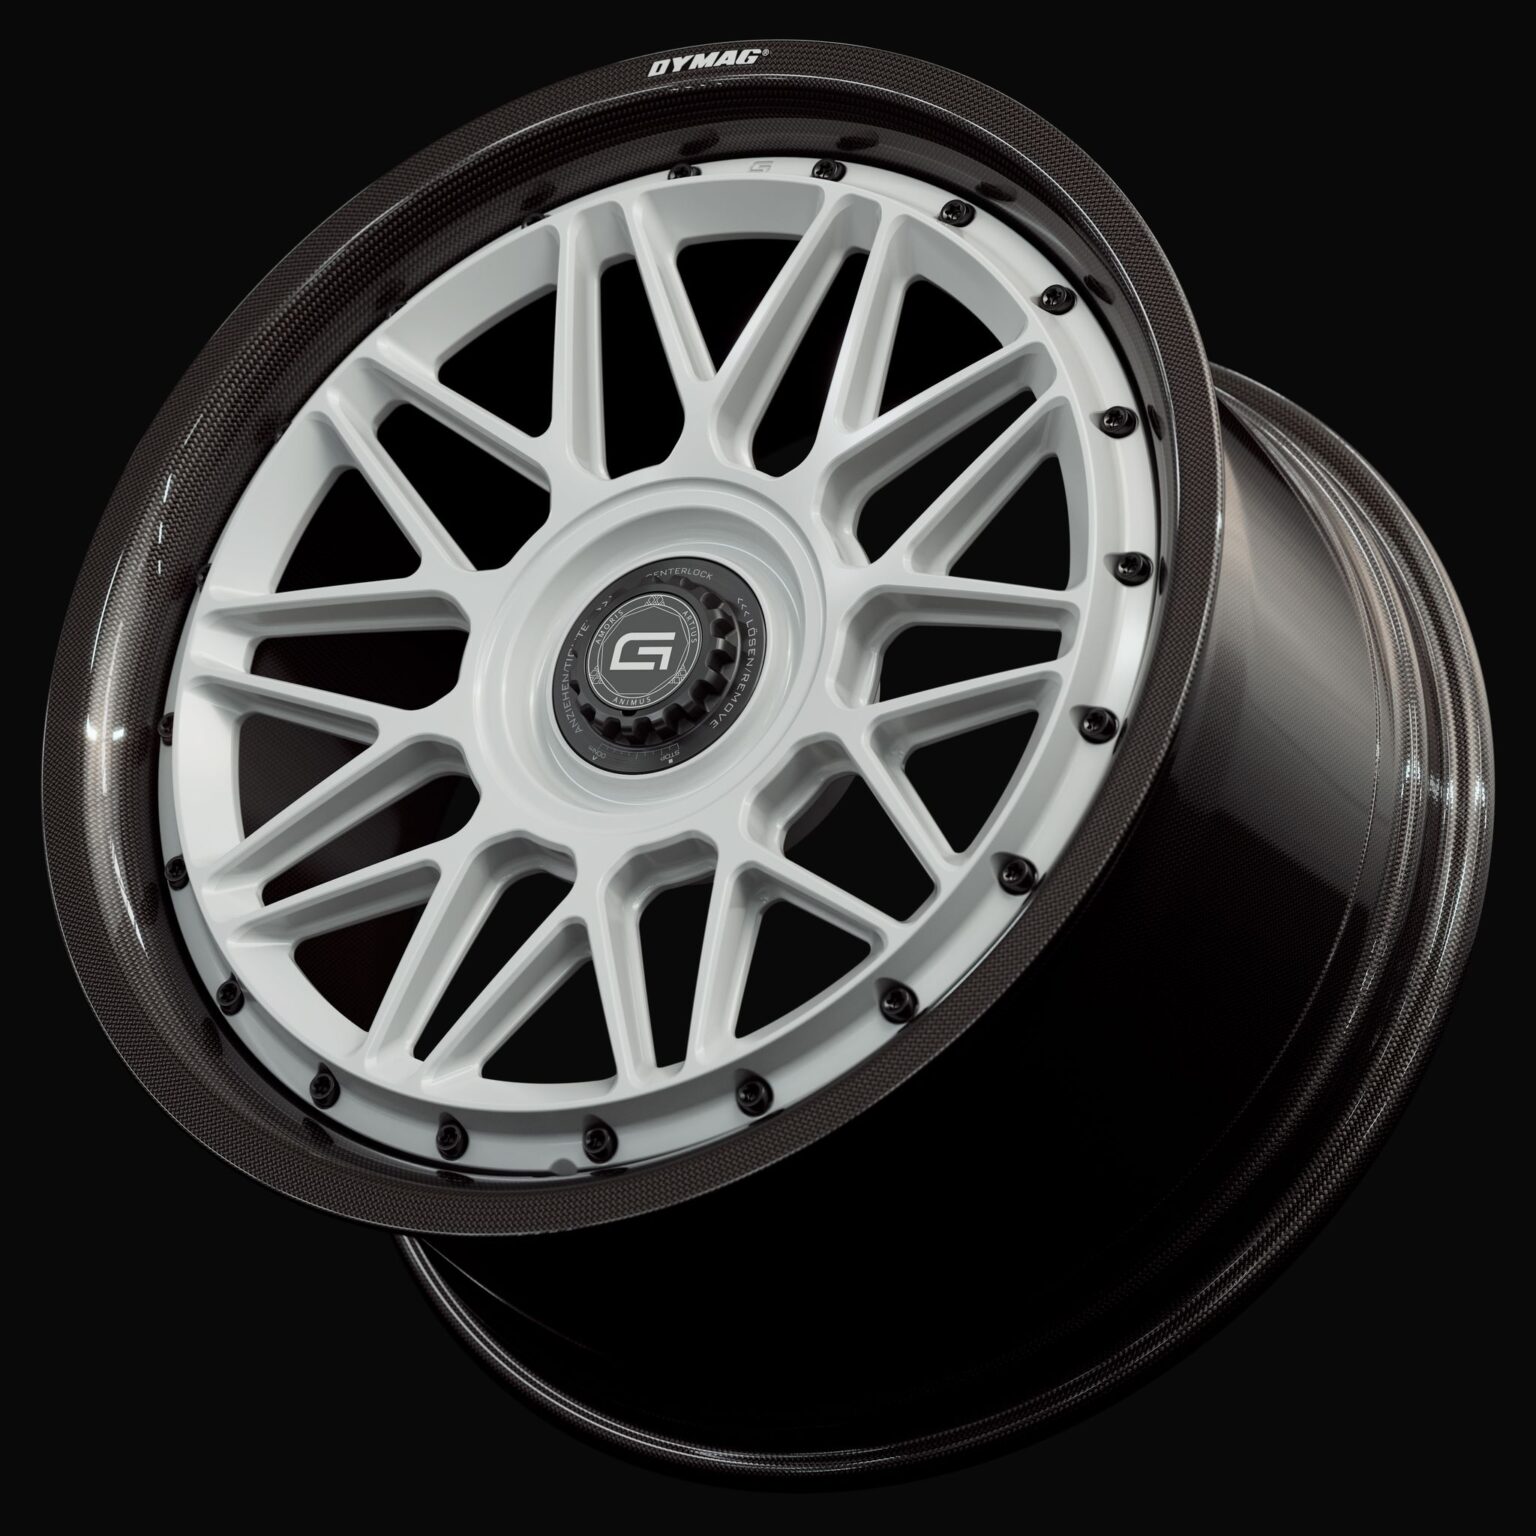 Three-quarter view of a white G24 2-piece centerlock wheel from Govad Forged Carbon8 series with carbon fiber lip